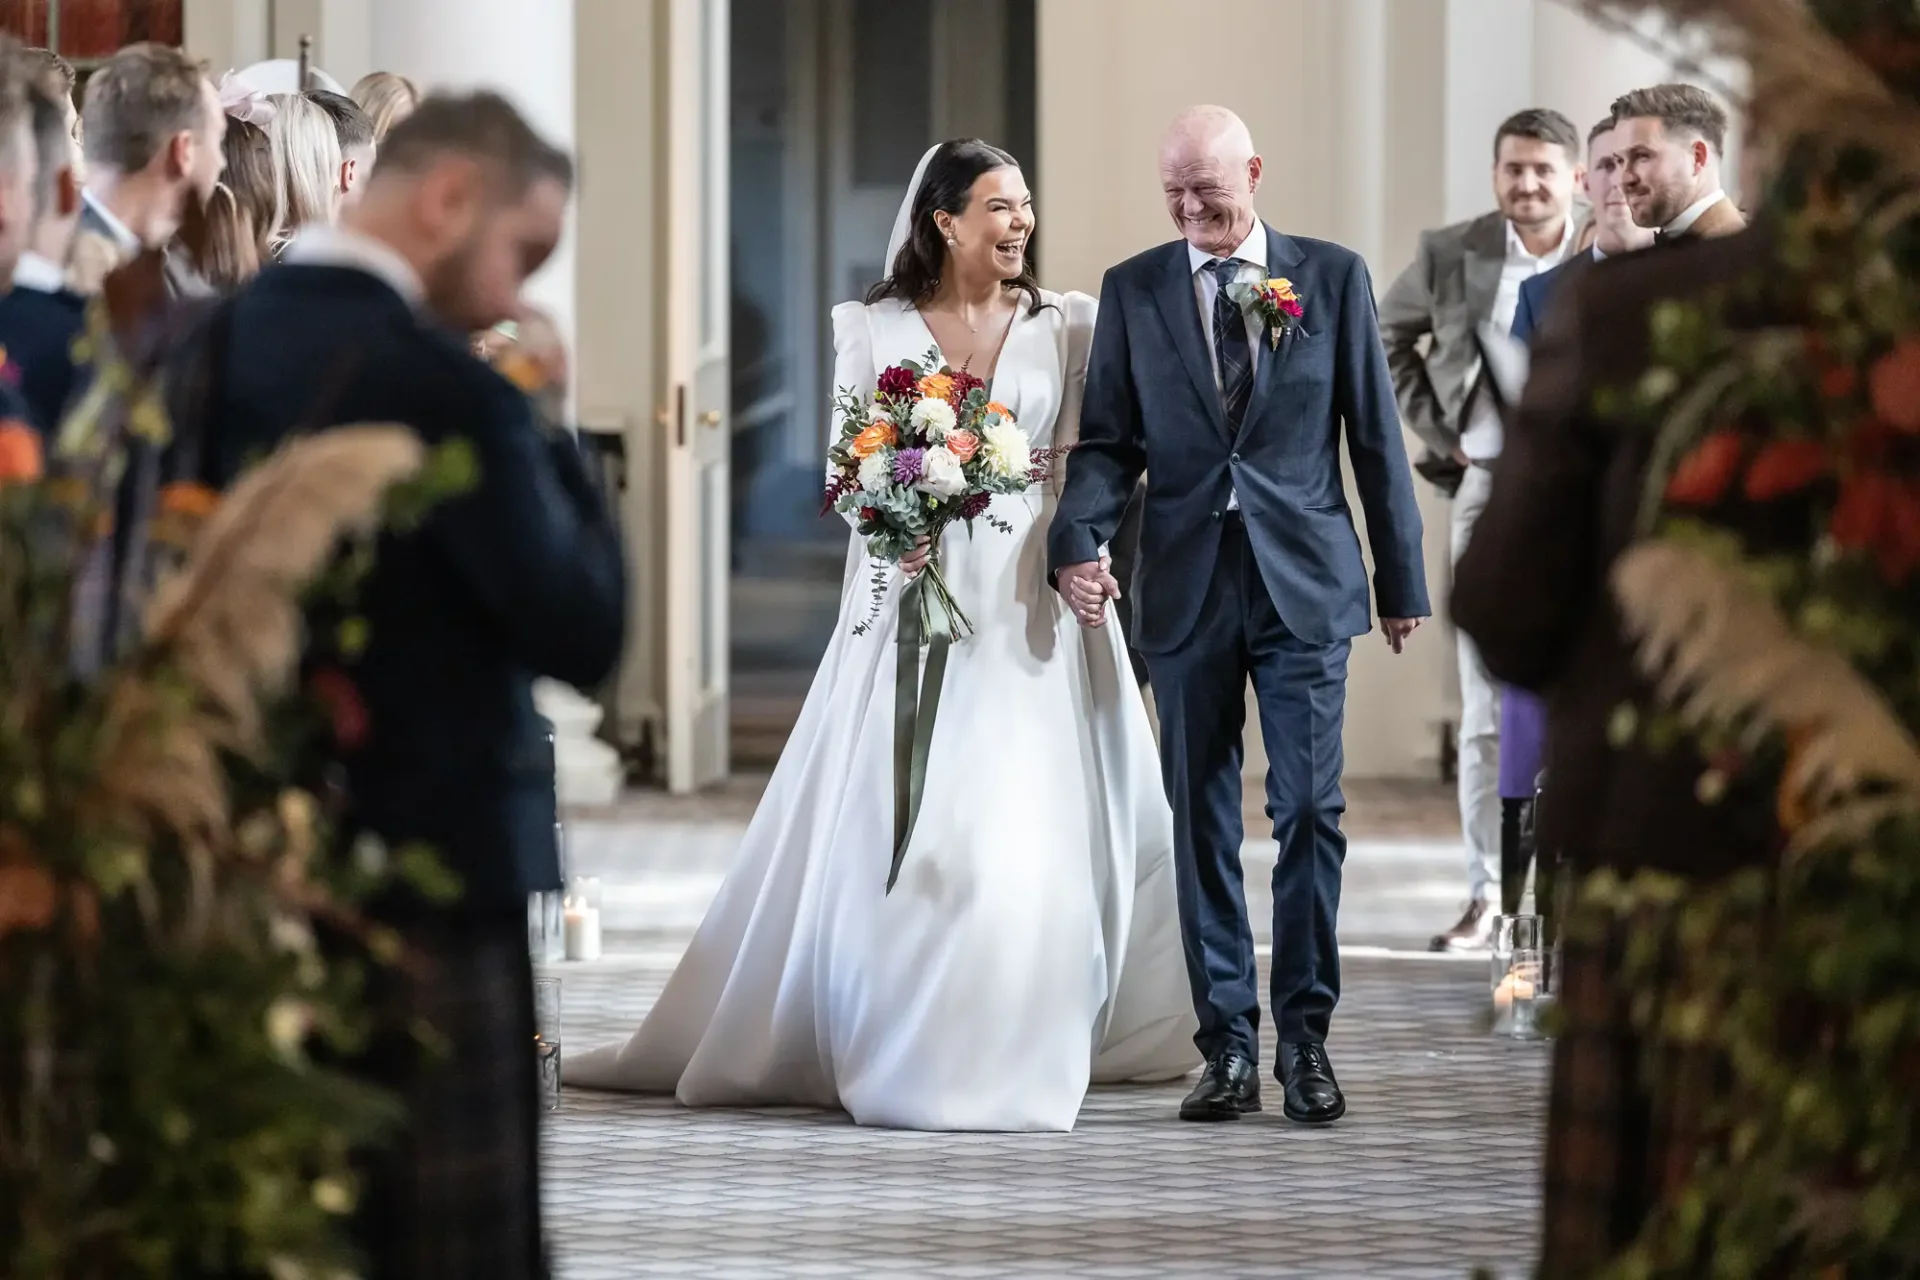 A bride and her father walk down the aisle, smiling, with guests on either side in a well-lit venue.